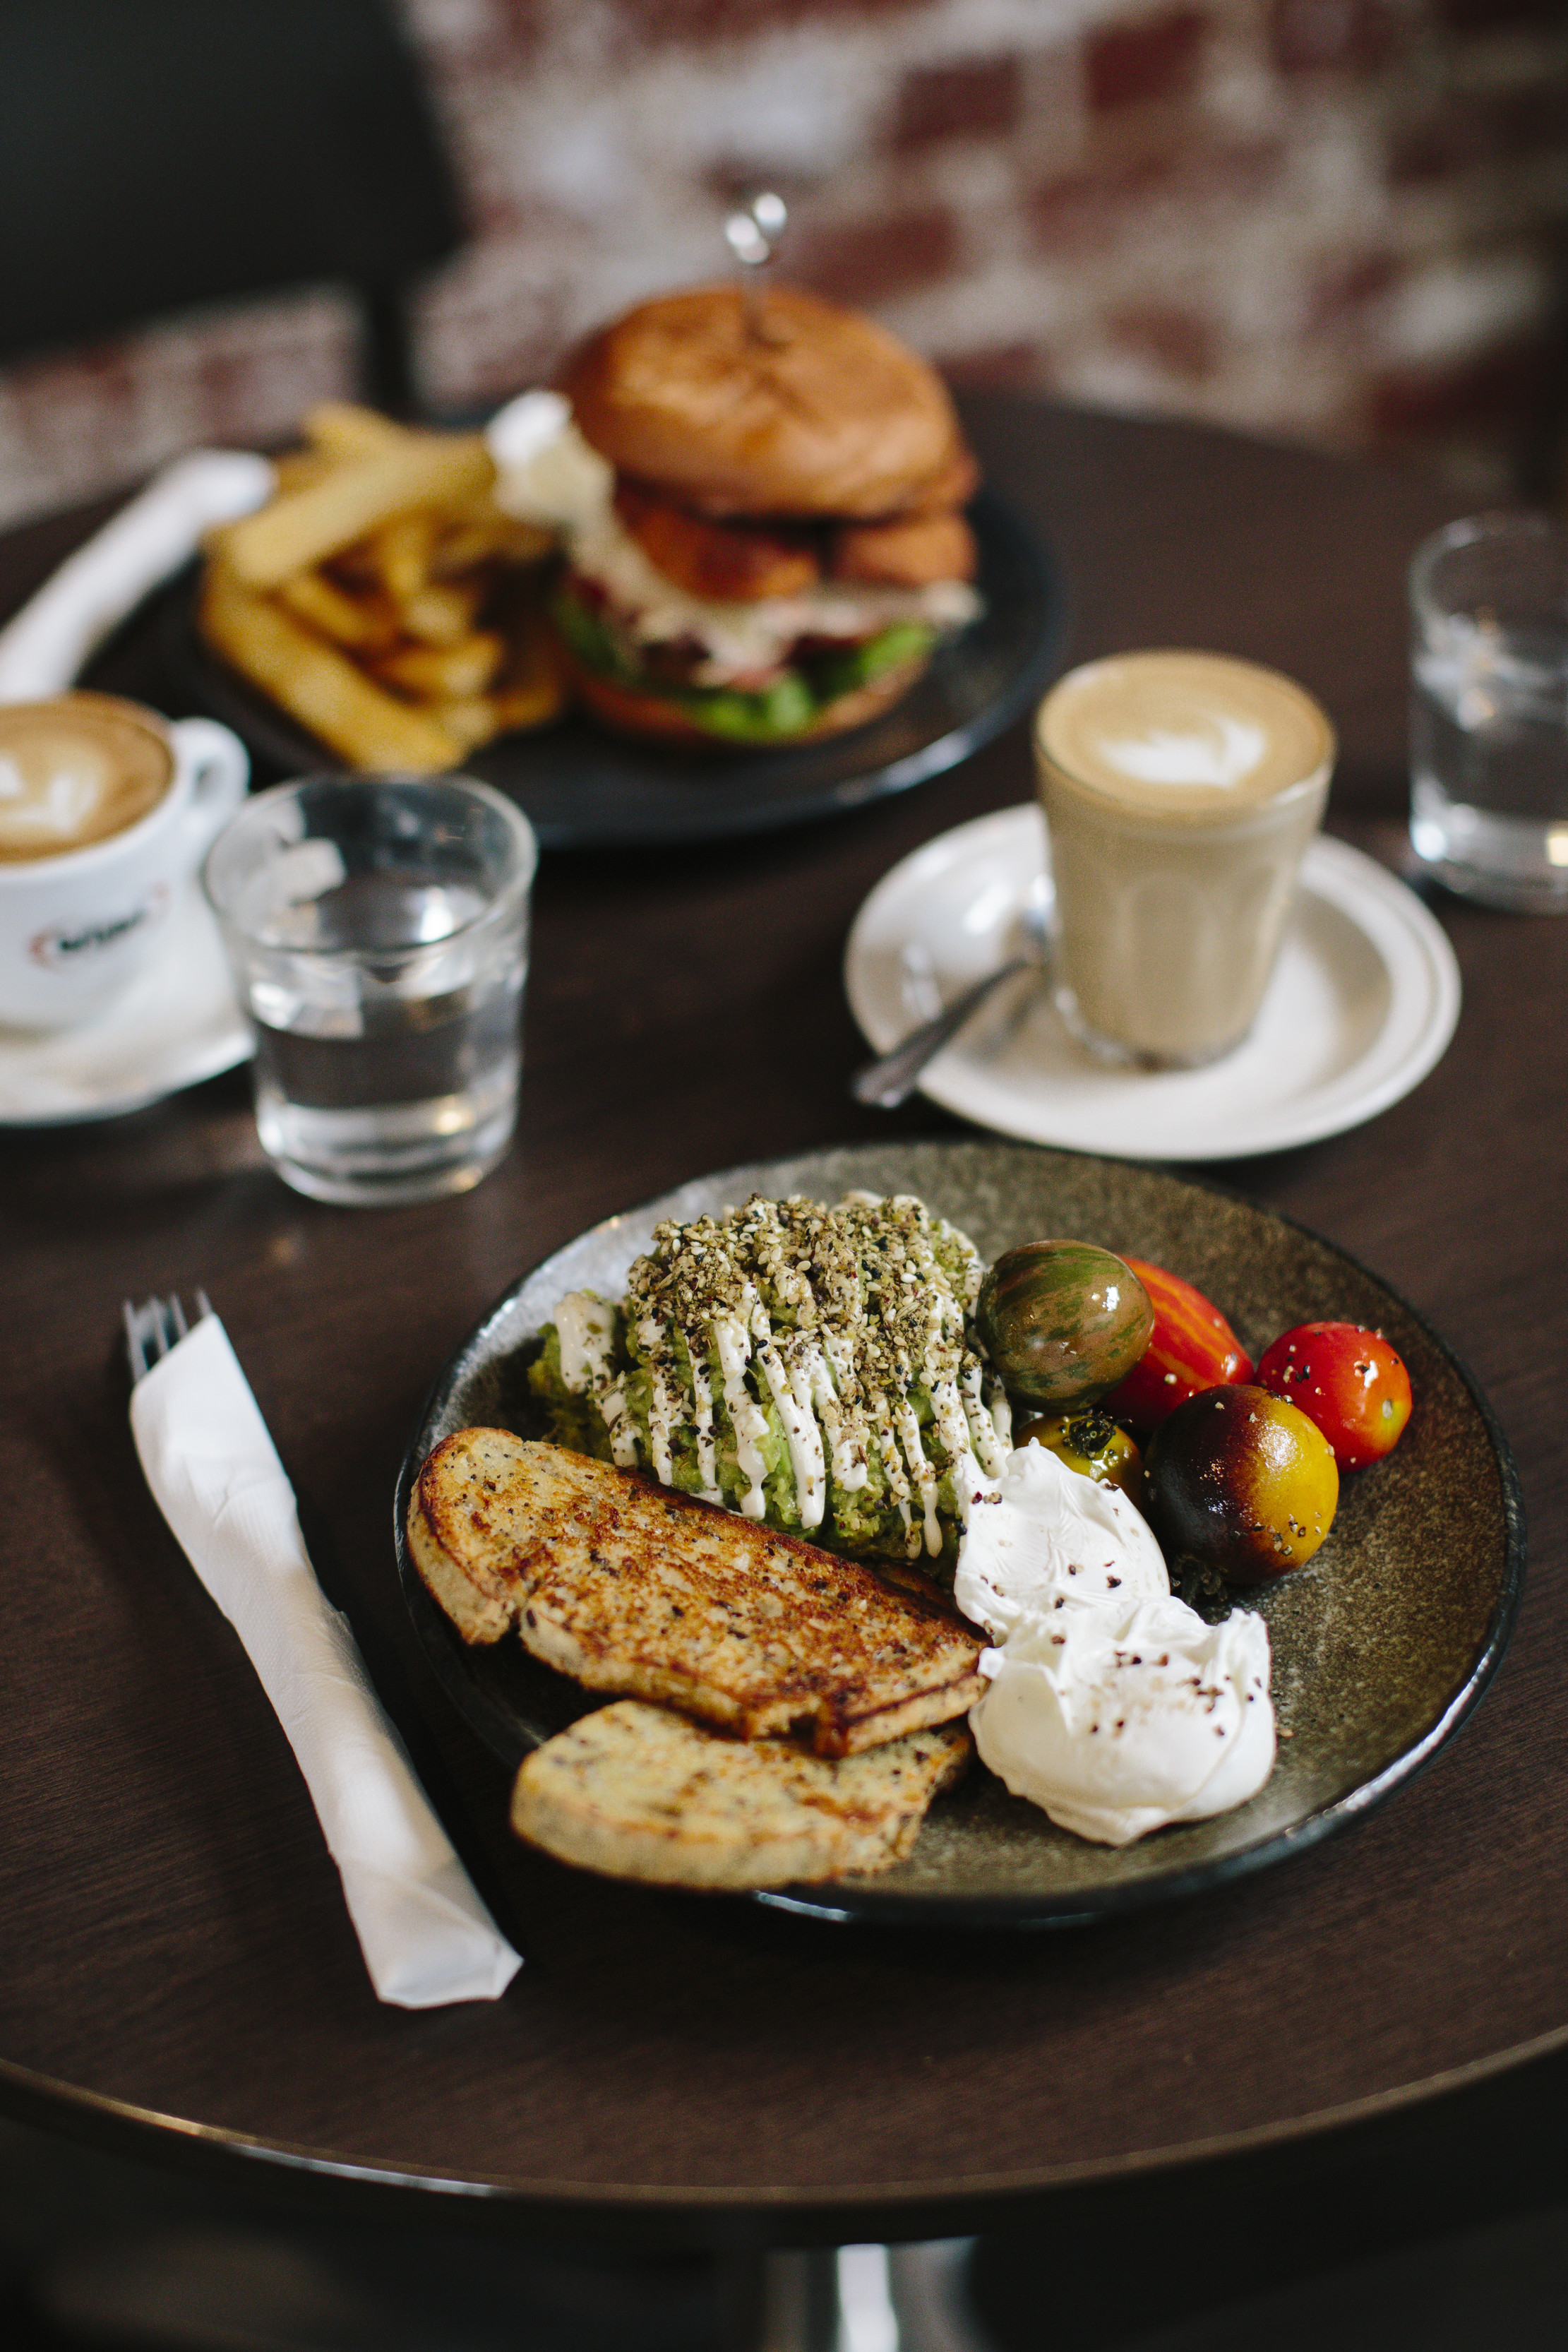 Breakfast, hearty mains & single-origin coffee at Laneway Cafe, a rustic-chic joint with a warm vibe.